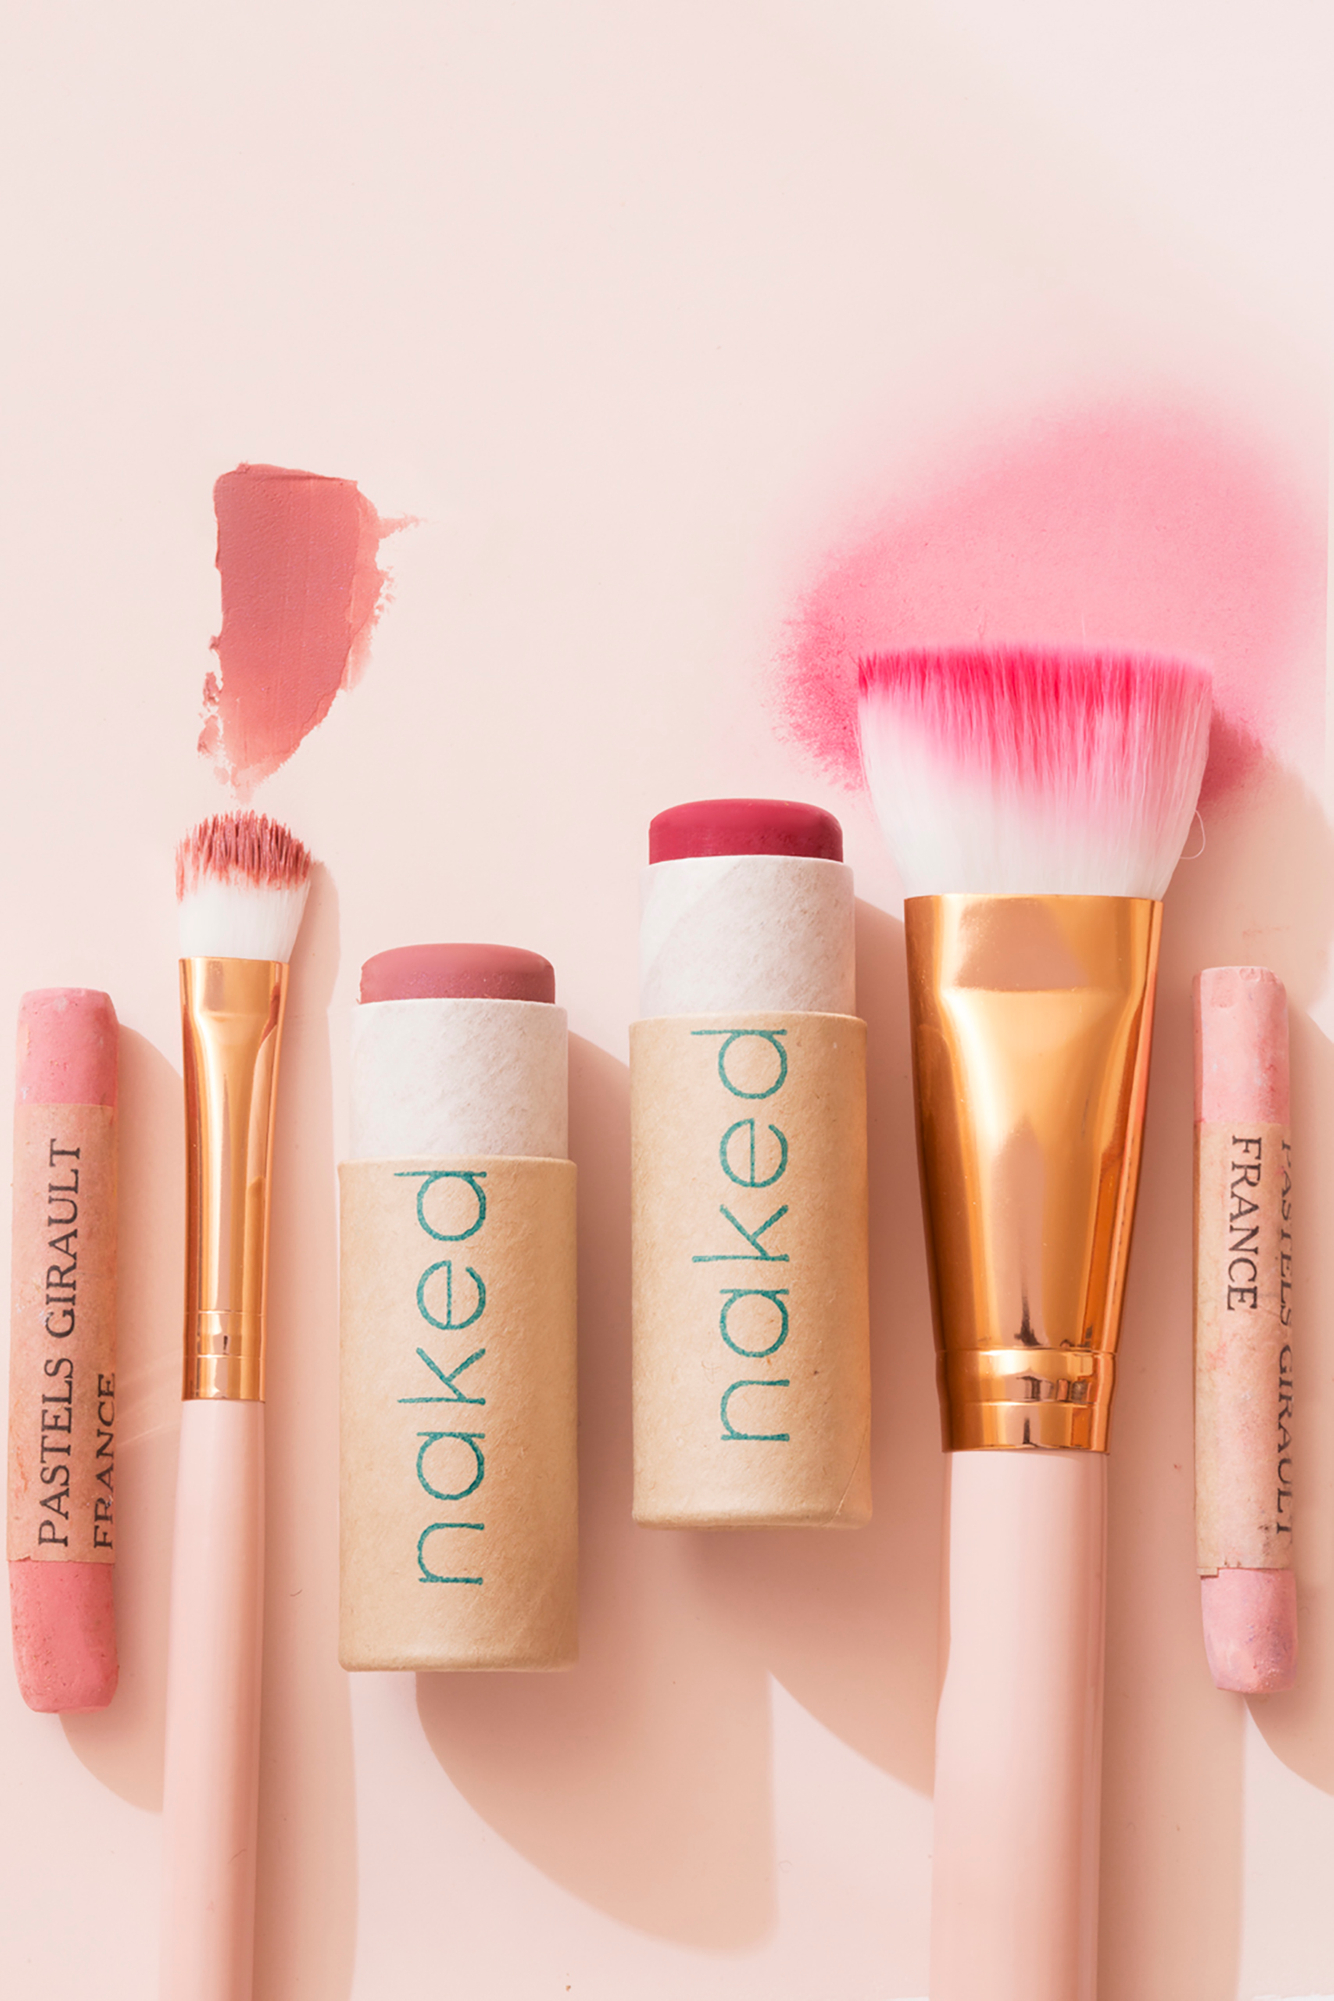 Naked makeup in bright and earthy pink blush tones